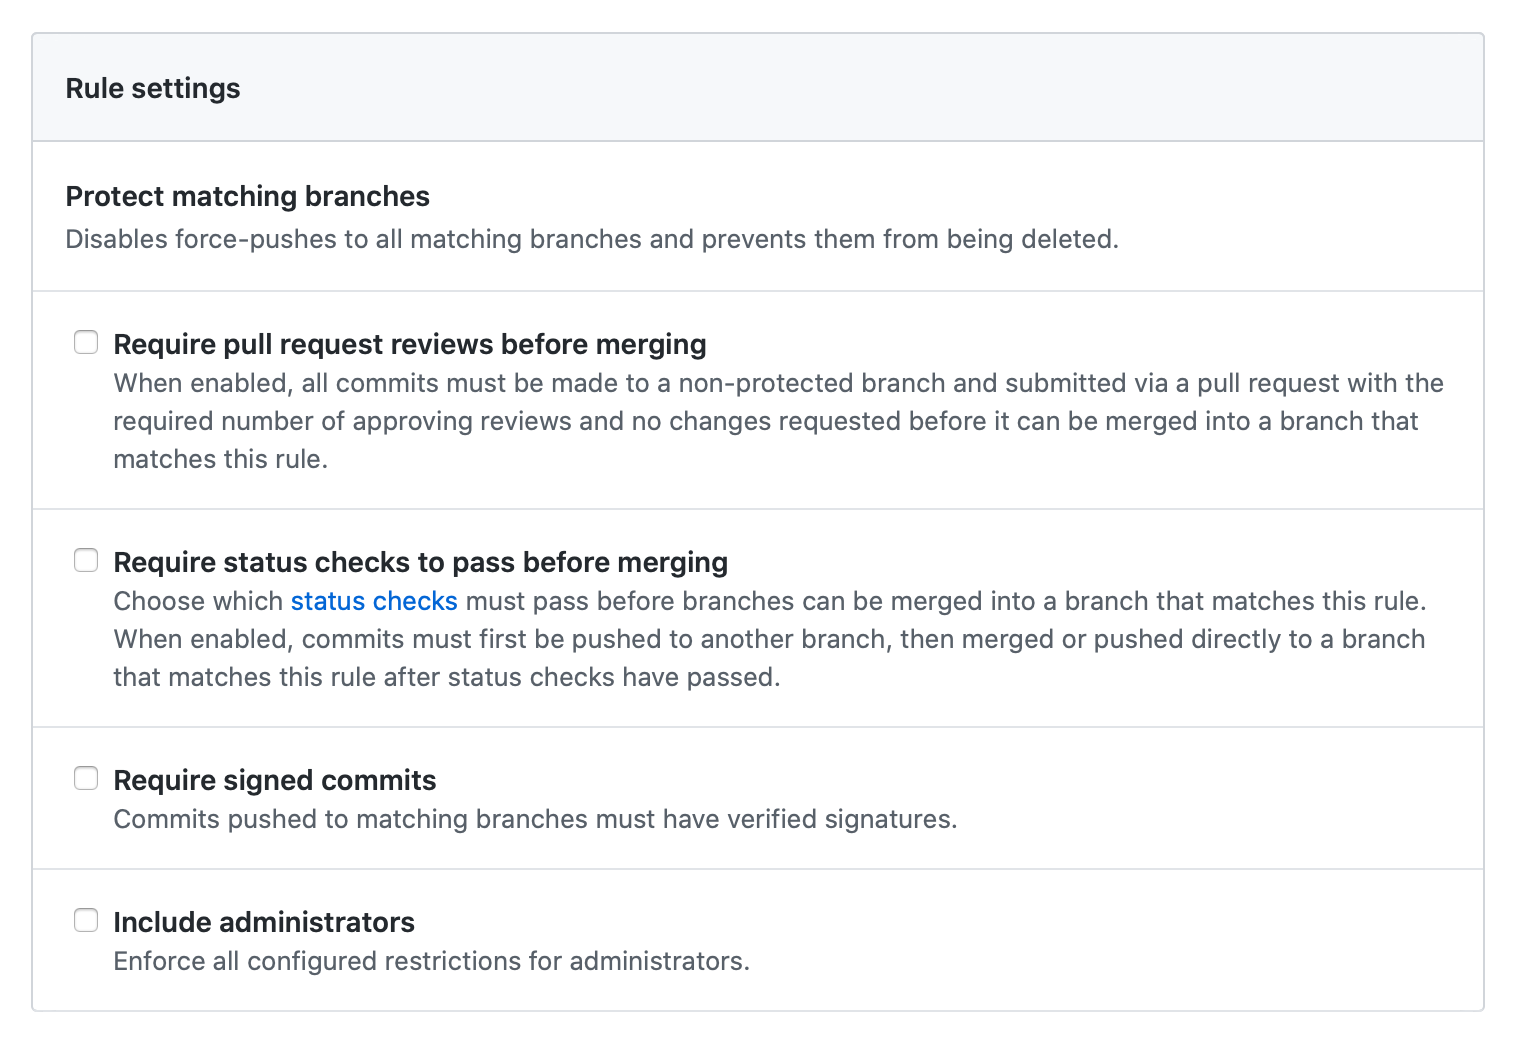 Protected branch rule settings